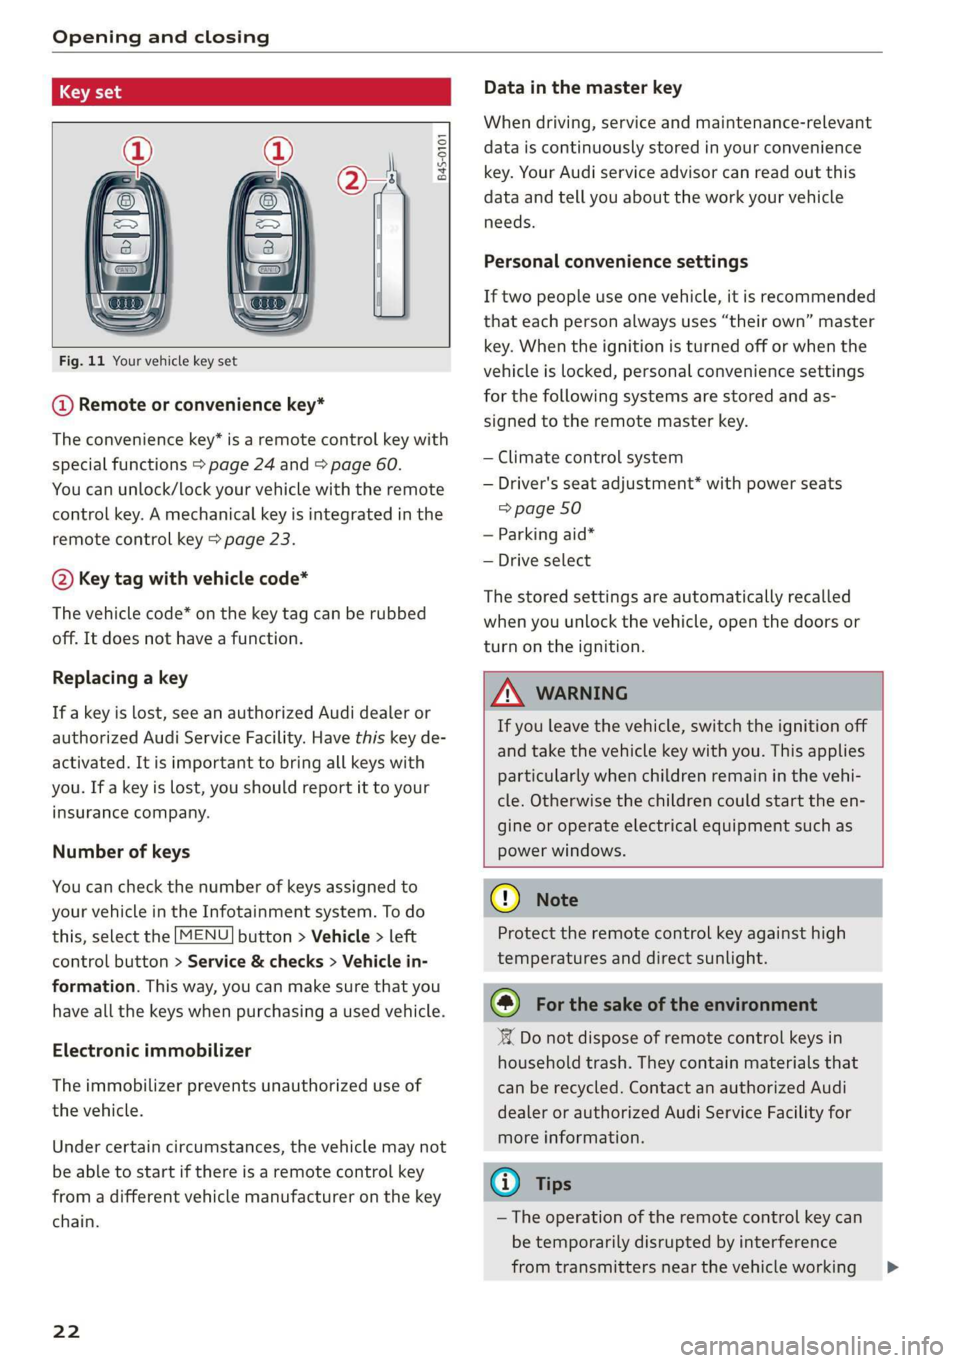 AUDI R8 COUPE 2020  Owners Manual Opening and closing 
  
  
B45-0101 
  
      
Fig. 11 Your vehicle key set 
@ Remote or convenience key* 
The convenience key* is a remote control key with 
special functions > page 24 and > page 60.